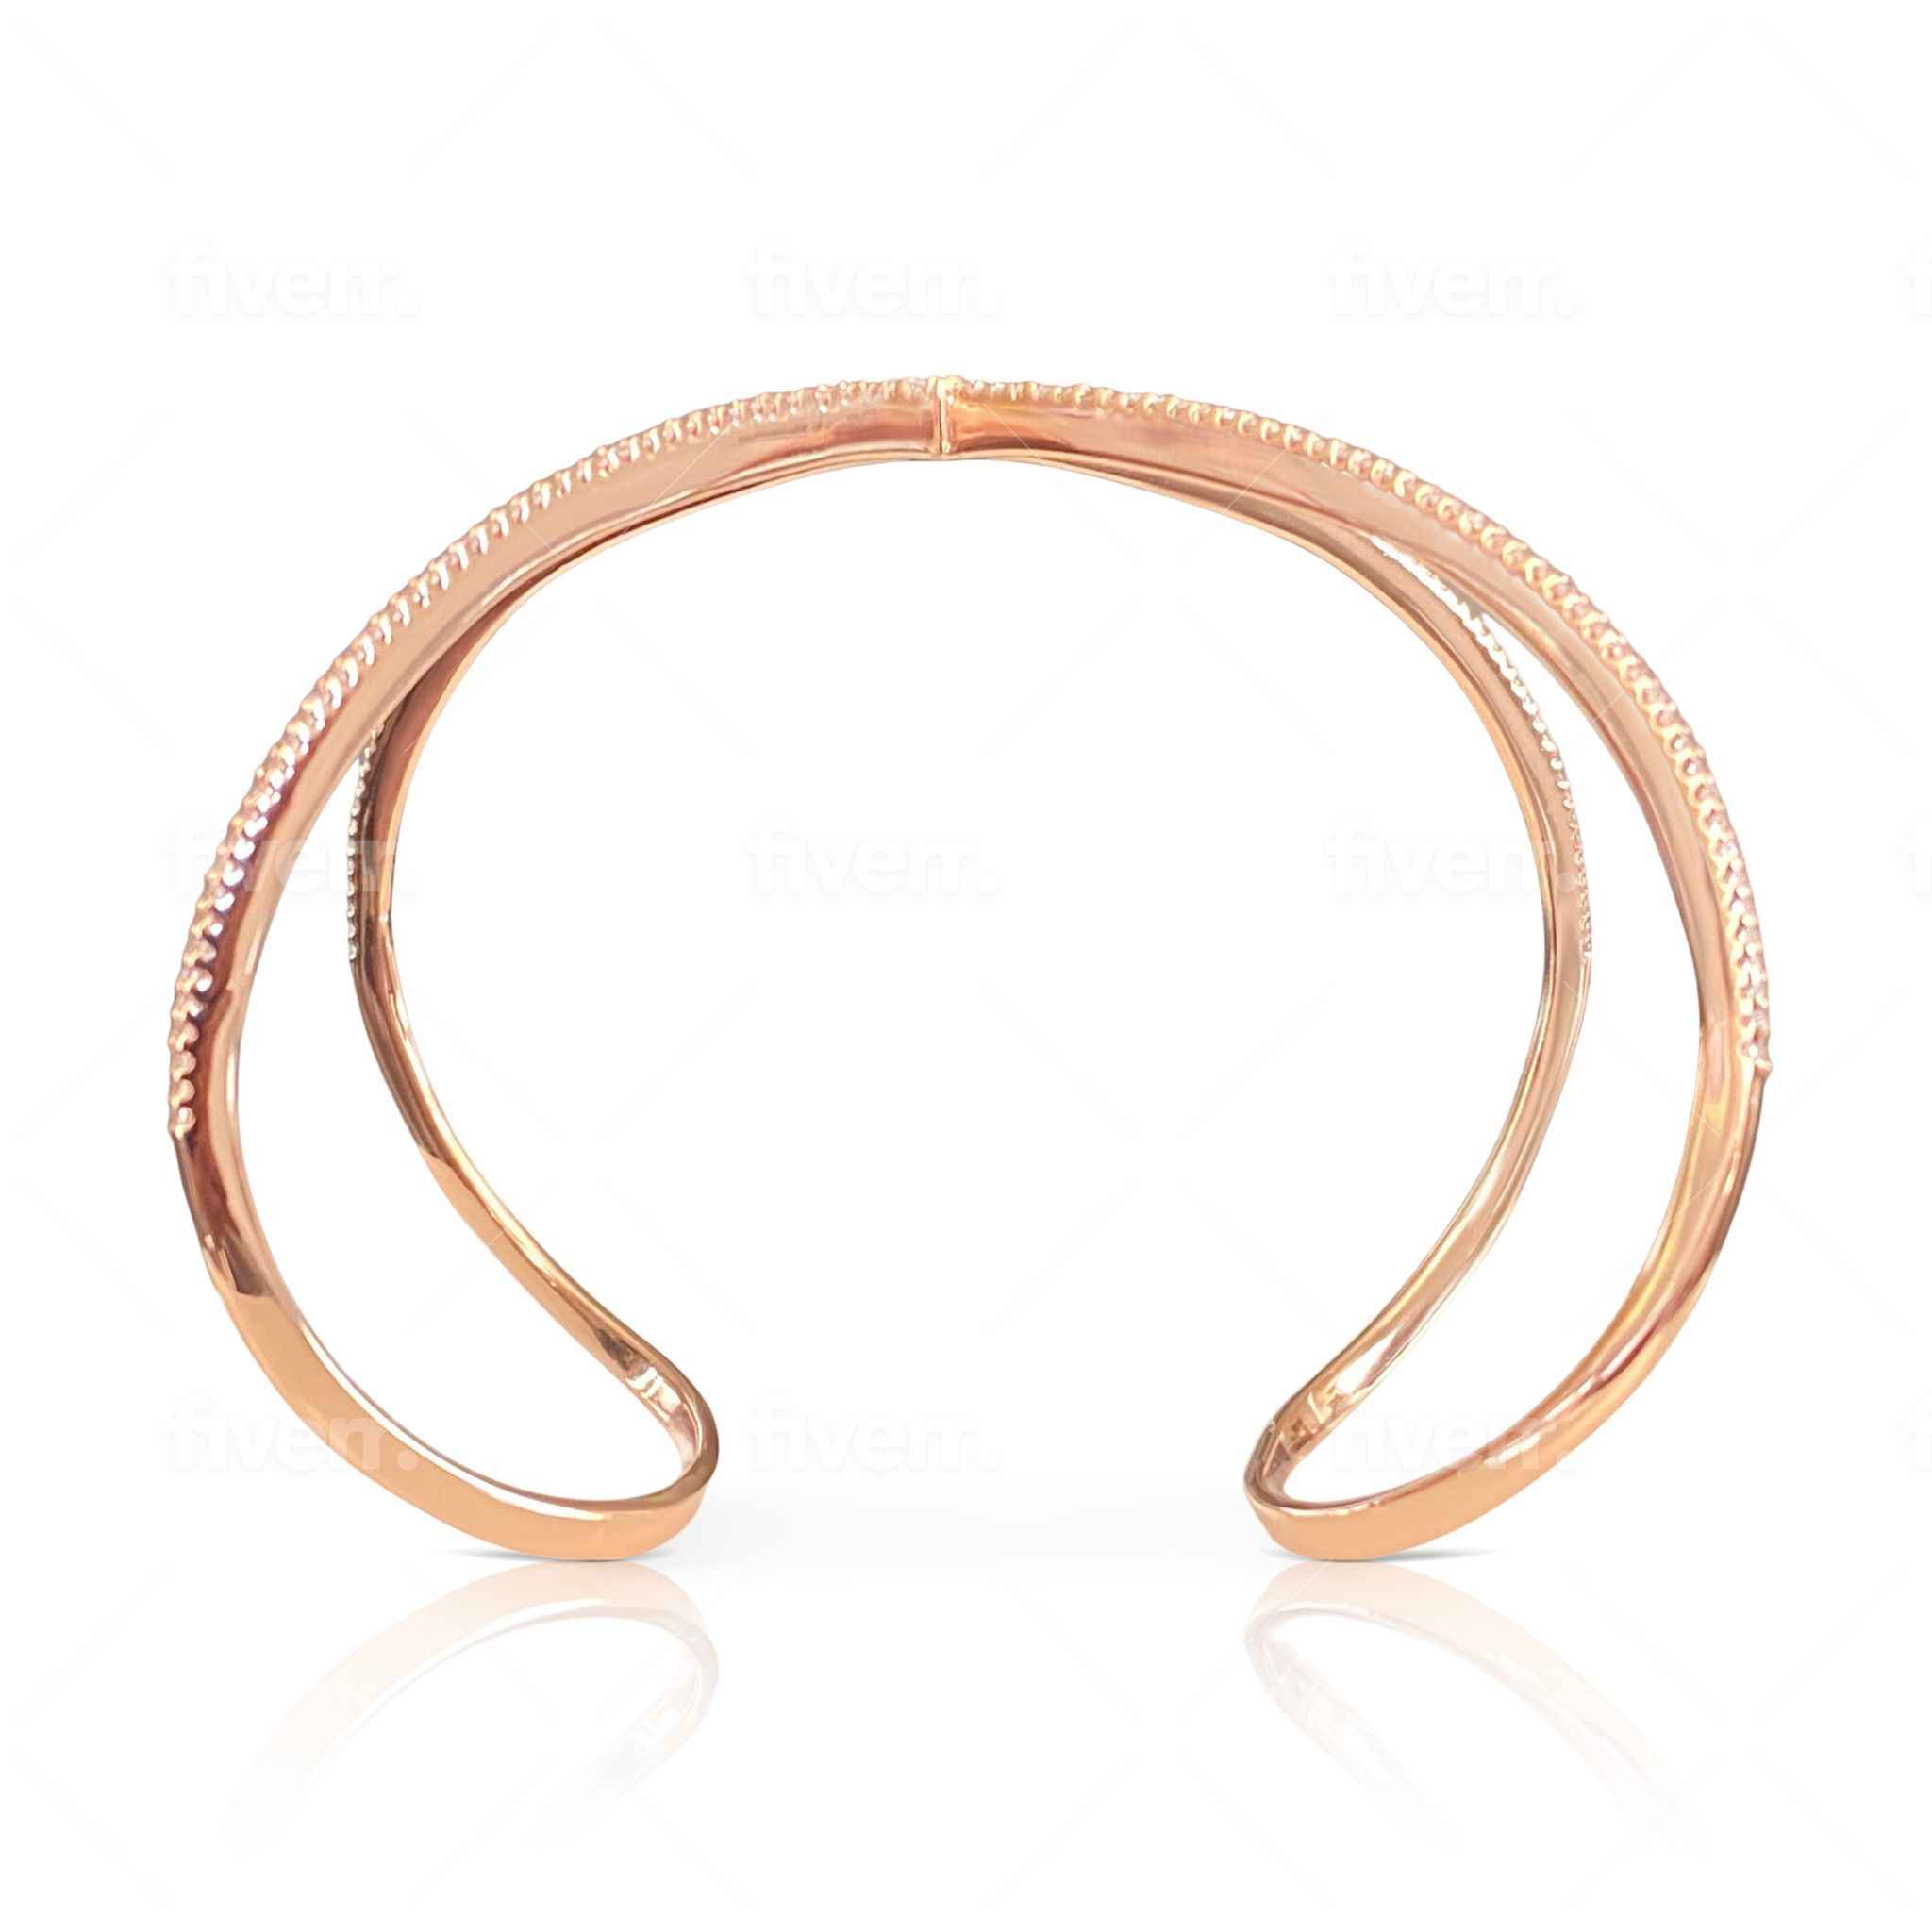 Stunning Waverly Cross Bangle in Rose Gold - Side Angle Detail.